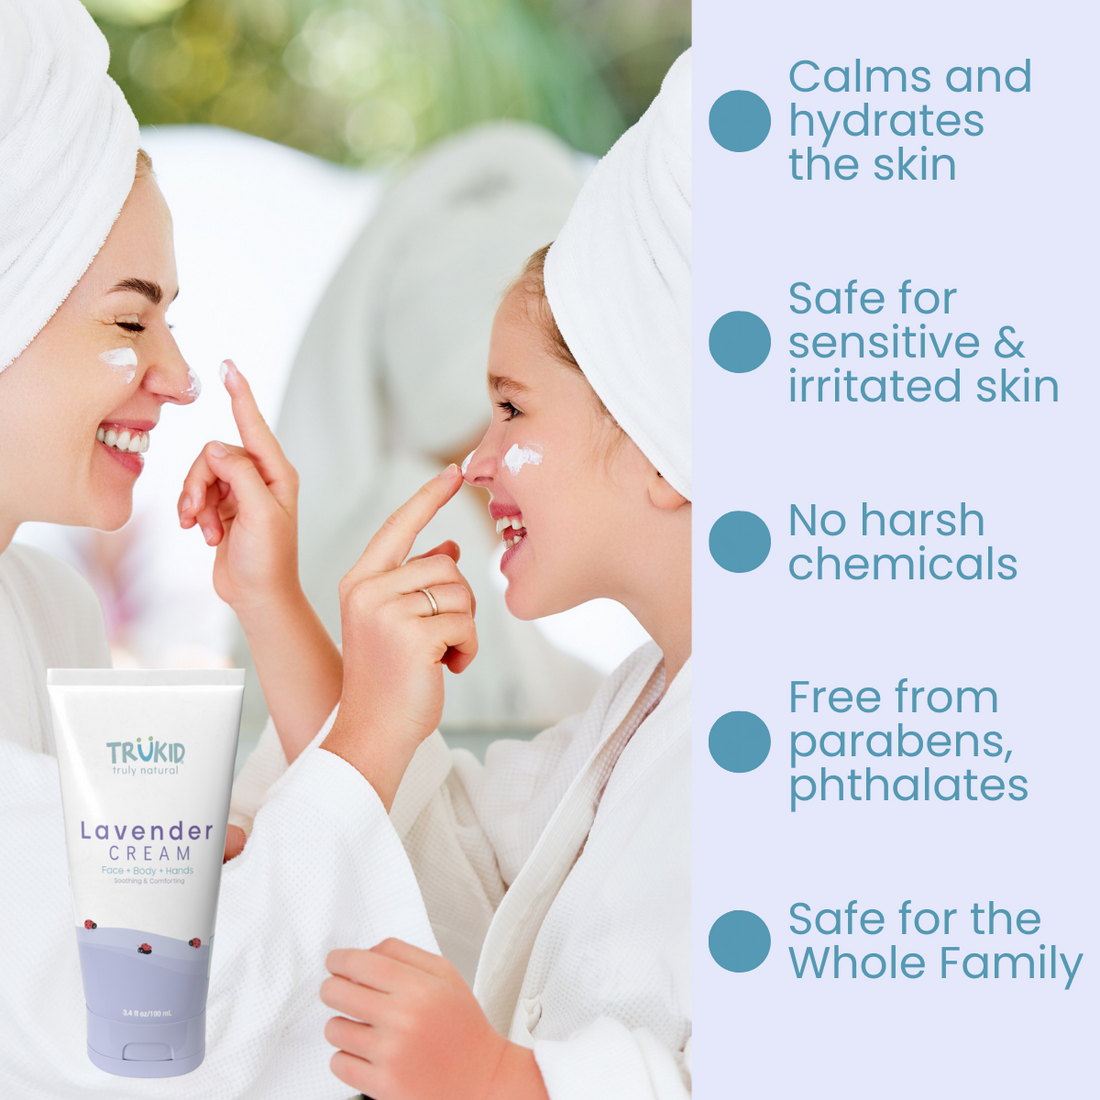 TruKid-Lavender-Cream calms and hydrates skin for the whole family